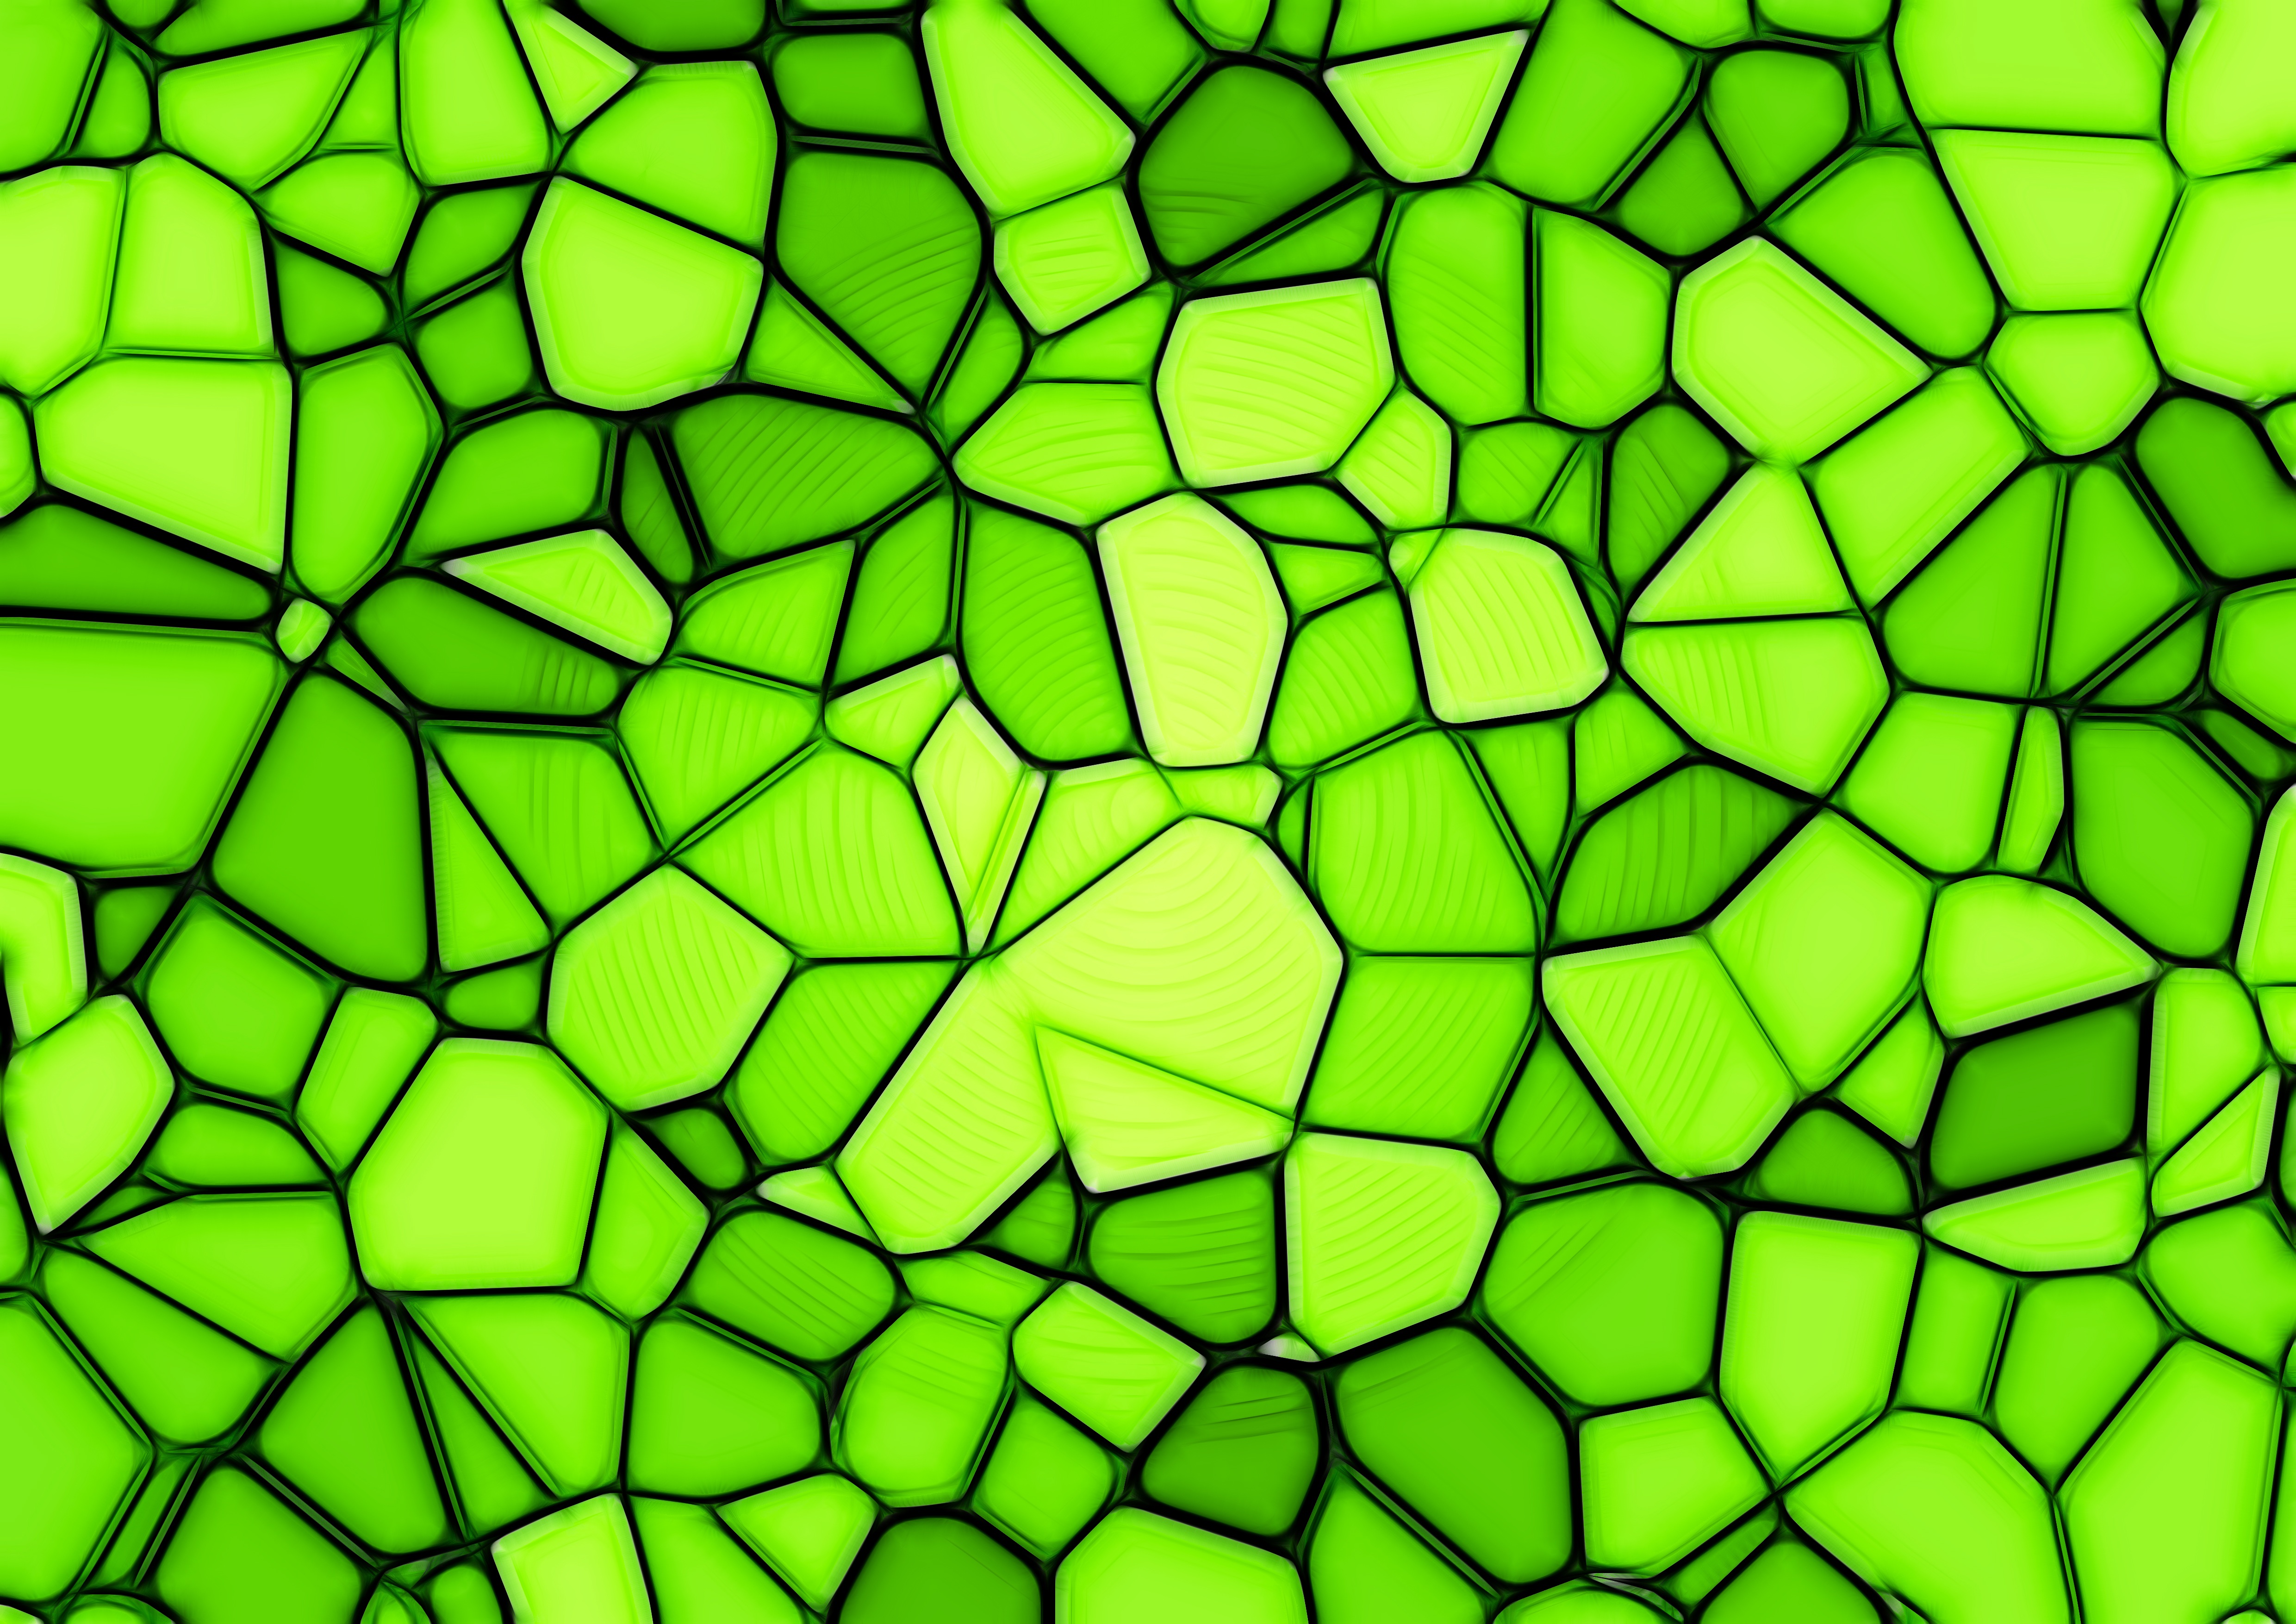 green, light green, triangles, texture, textures, salad, squares